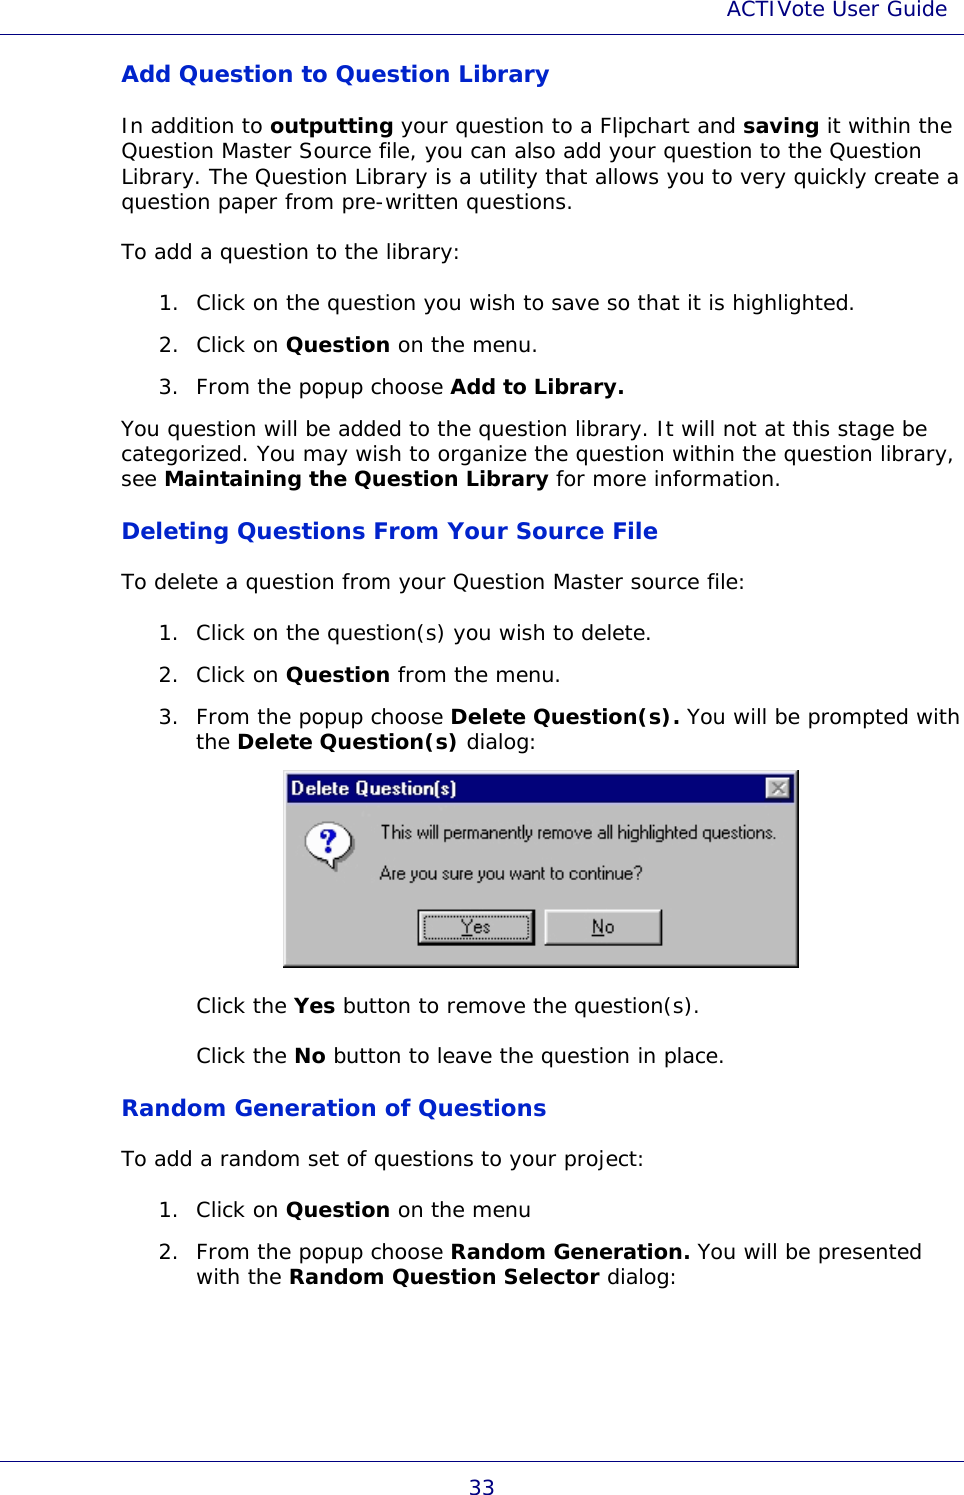 ACTIVote User Guide 33 Add Question to Question Library In addition to outputting your question to a Flipchart and saving it within the Question Master Source file, you can also add your question to the Question Library. The Question Library is a utility that allows you to very quickly create a question paper from pre-written questions. To add a question to the library: 1. Click on the question you wish to save so that it is highlighted. 2. Click on Question on the menu. 3. From the popup choose Add to Library. You question will be added to the question library. It will not at this stage be categorized. You may wish to organize the question within the question library, see Maintaining the Question Library for more information. Deleting Questions From Your Source File To delete a question from your Question Master source file: 1. Click on the question(s) you wish to delete. 2. Click on Question from the menu. 3. From the popup choose Delete Question(s). You will be prompted with the Delete Question(s) dialog:  Click the Yes button to remove the question(s). Click the No button to leave the question in place. Random Generation of Questions To add a random set of questions to your project: 1. Click on Question on the menu 2. From the popup choose Random Generation. You will be presented with the Random Question Selector dialog: 